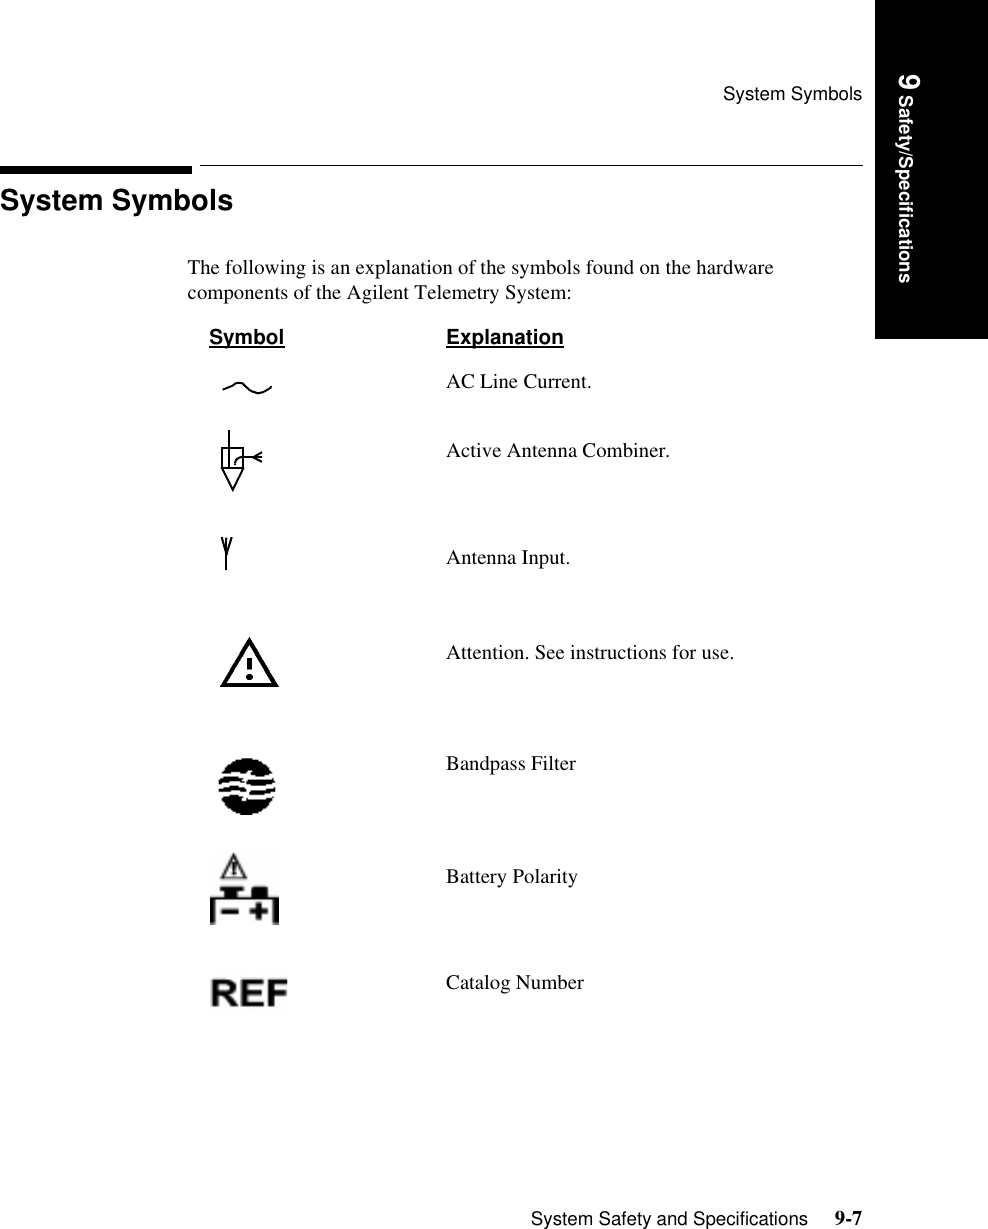 System SymbolsSystem Safety and Specifications     9-79 Safety/SpecificationsSystem SymbolsThe following is an explanation of the symbols found on the hardware components of the Agilent Telemetry System:Symbol ExplanationAC Line Current.Active Antenna Combiner.Antenna Input.Attention. See instructions for use.Bandpass FilterBattery PolarityCatalog Number